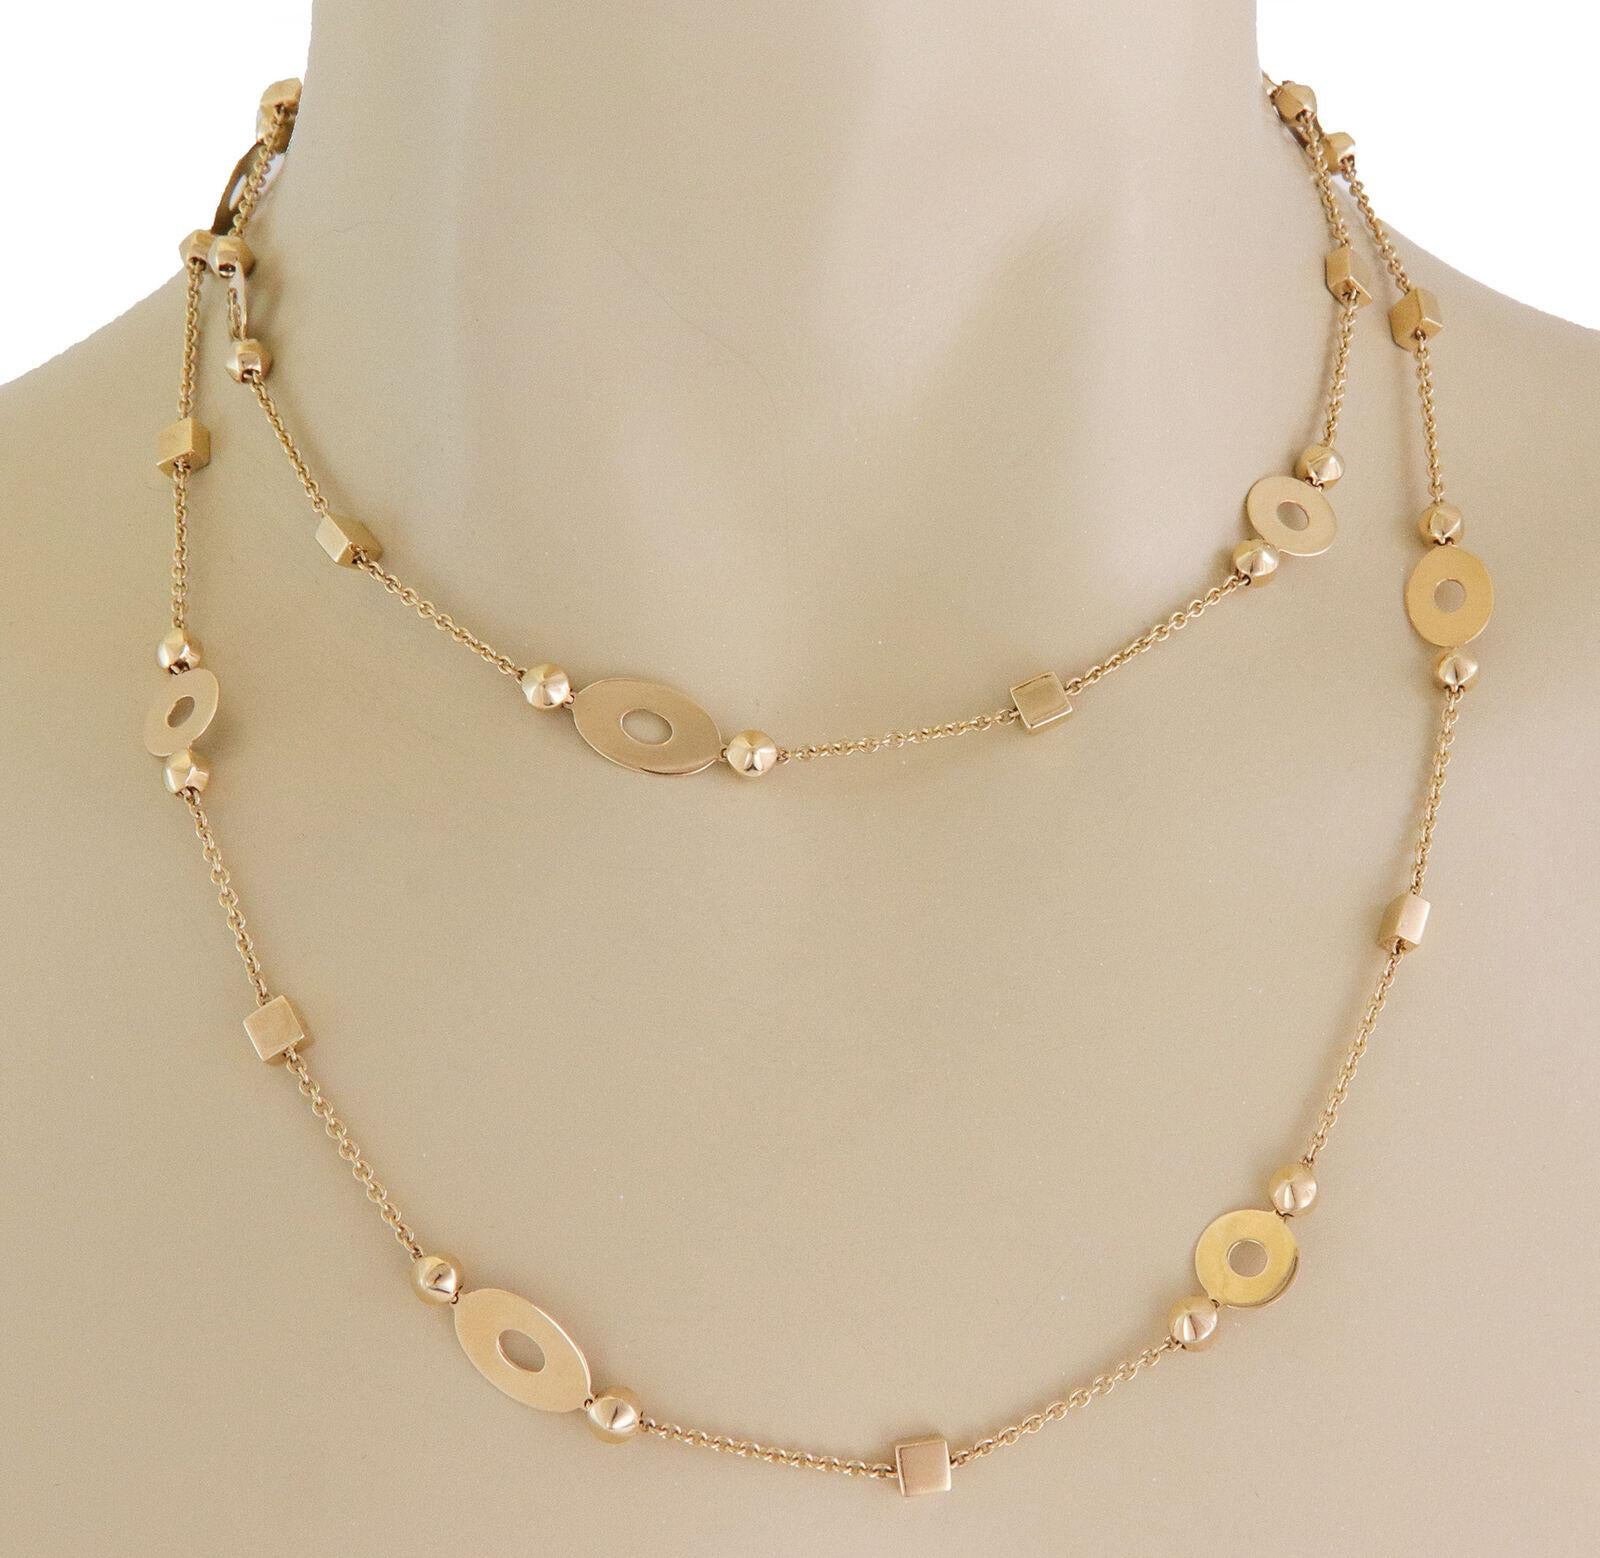 From the popular Lucia Collection by Bvlgari, this sophisticated authentic long necklace is crafted from 18k yellow gold with a high polished finish featuring classic style oval link chain with thin marquise, circle and cube shape motifs attached